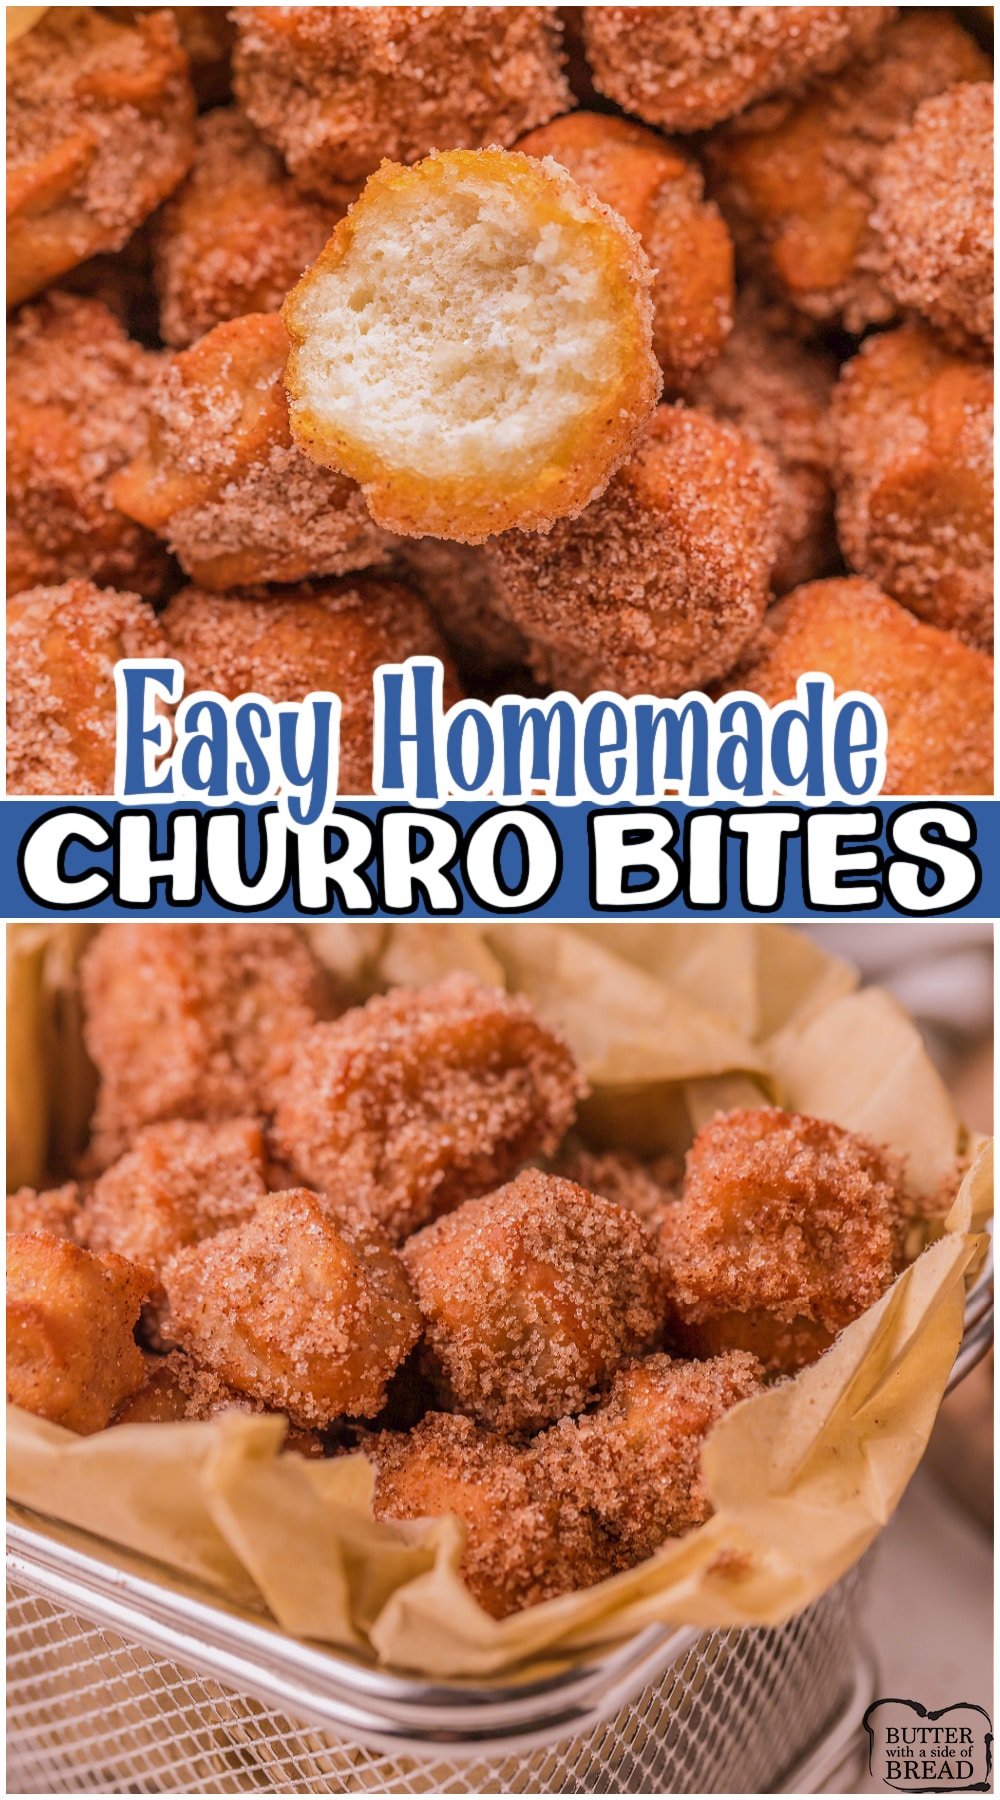 Churro Bites are tiny deep-fried bits of heaven, tossed in sweet cinnamon sugar! Easy, homemade churros made with simple ingredients are truly irresistible!